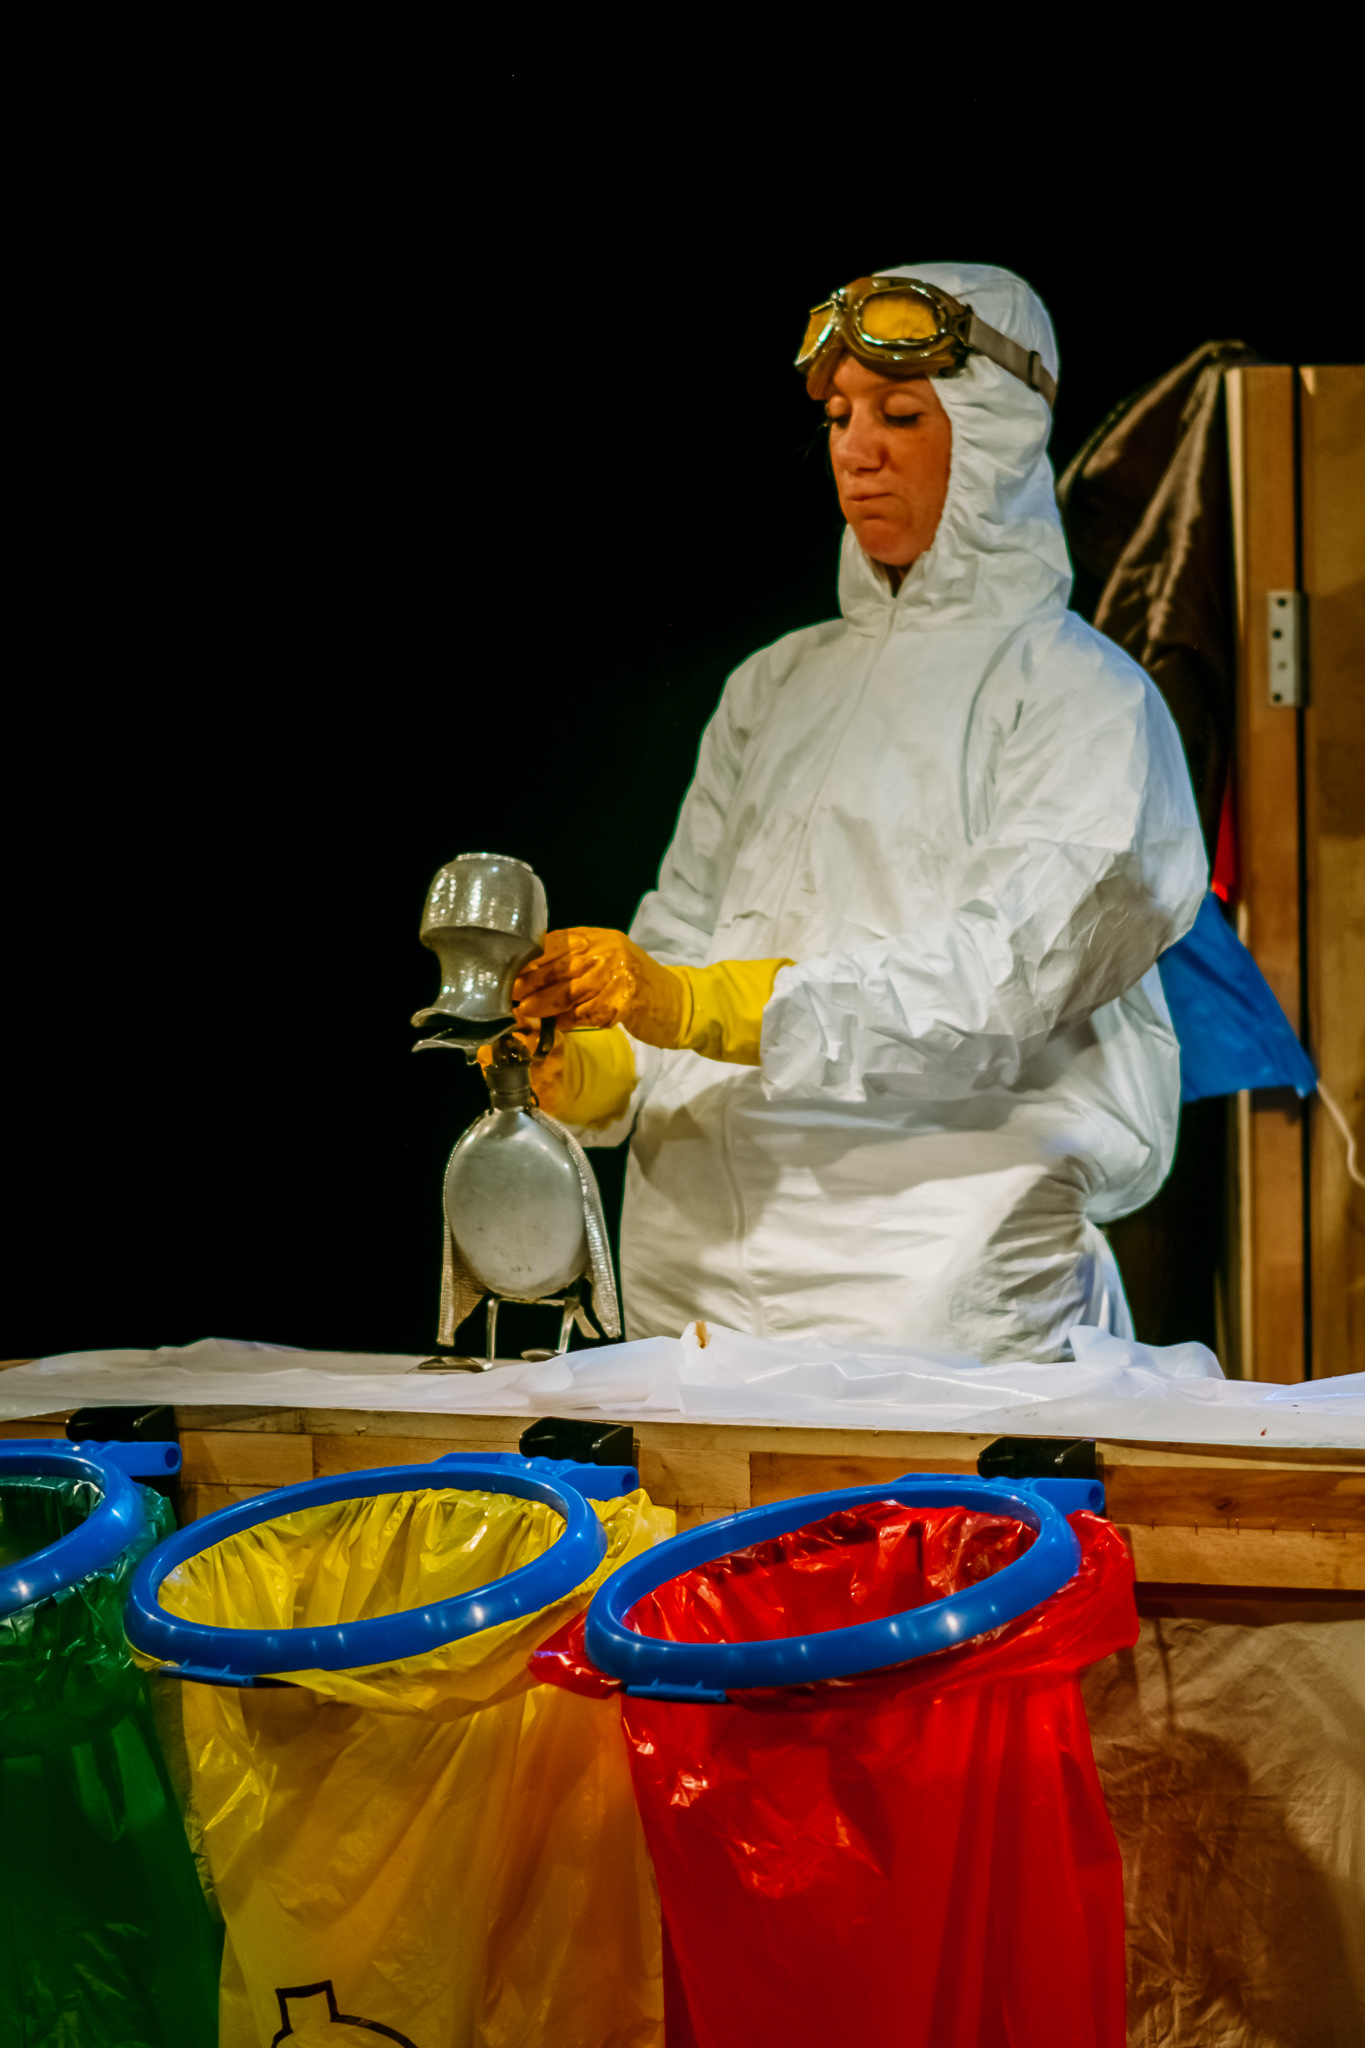 a performer dressed in white disposable boiler suit and yellow plastic gloves manipulates a puppet duck made from metal household items on a tabletop. A green, yellow and red plastic waste bag hang off the table in front of them.